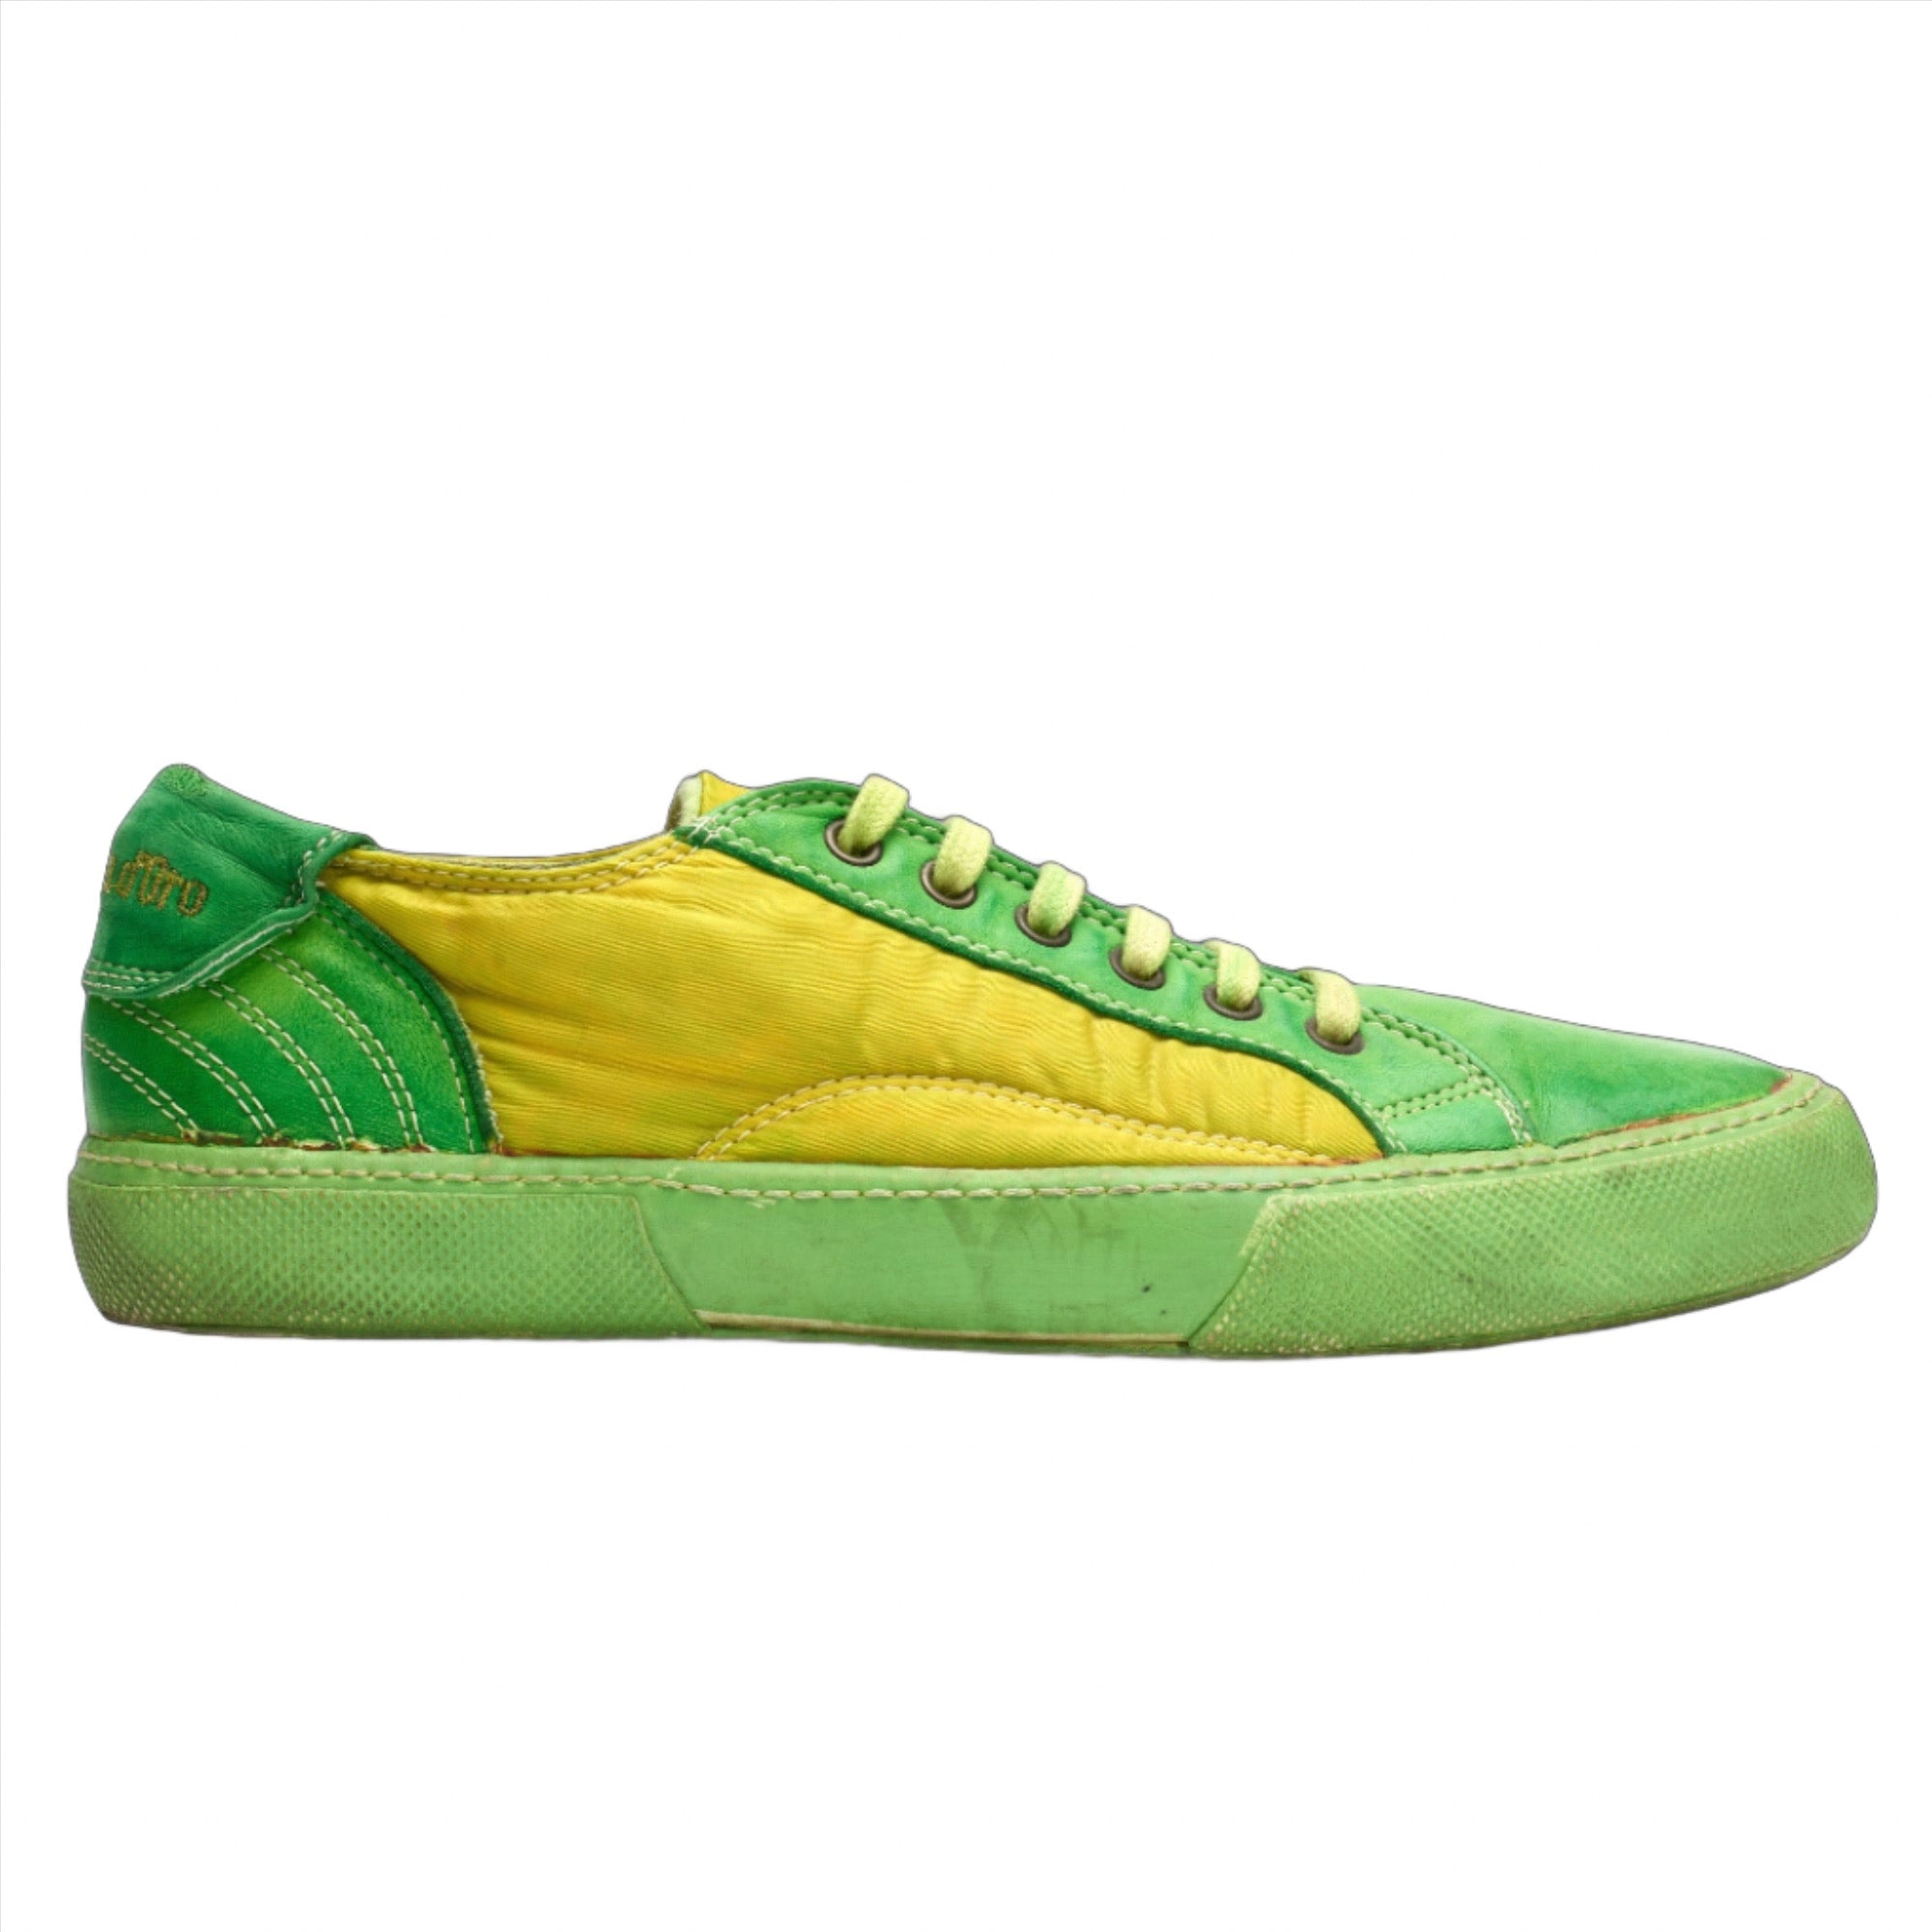 PANTOFOLA D'ORO Super Star Extra Green Leather Low Top Sneakers Shoes EU 43 US 10